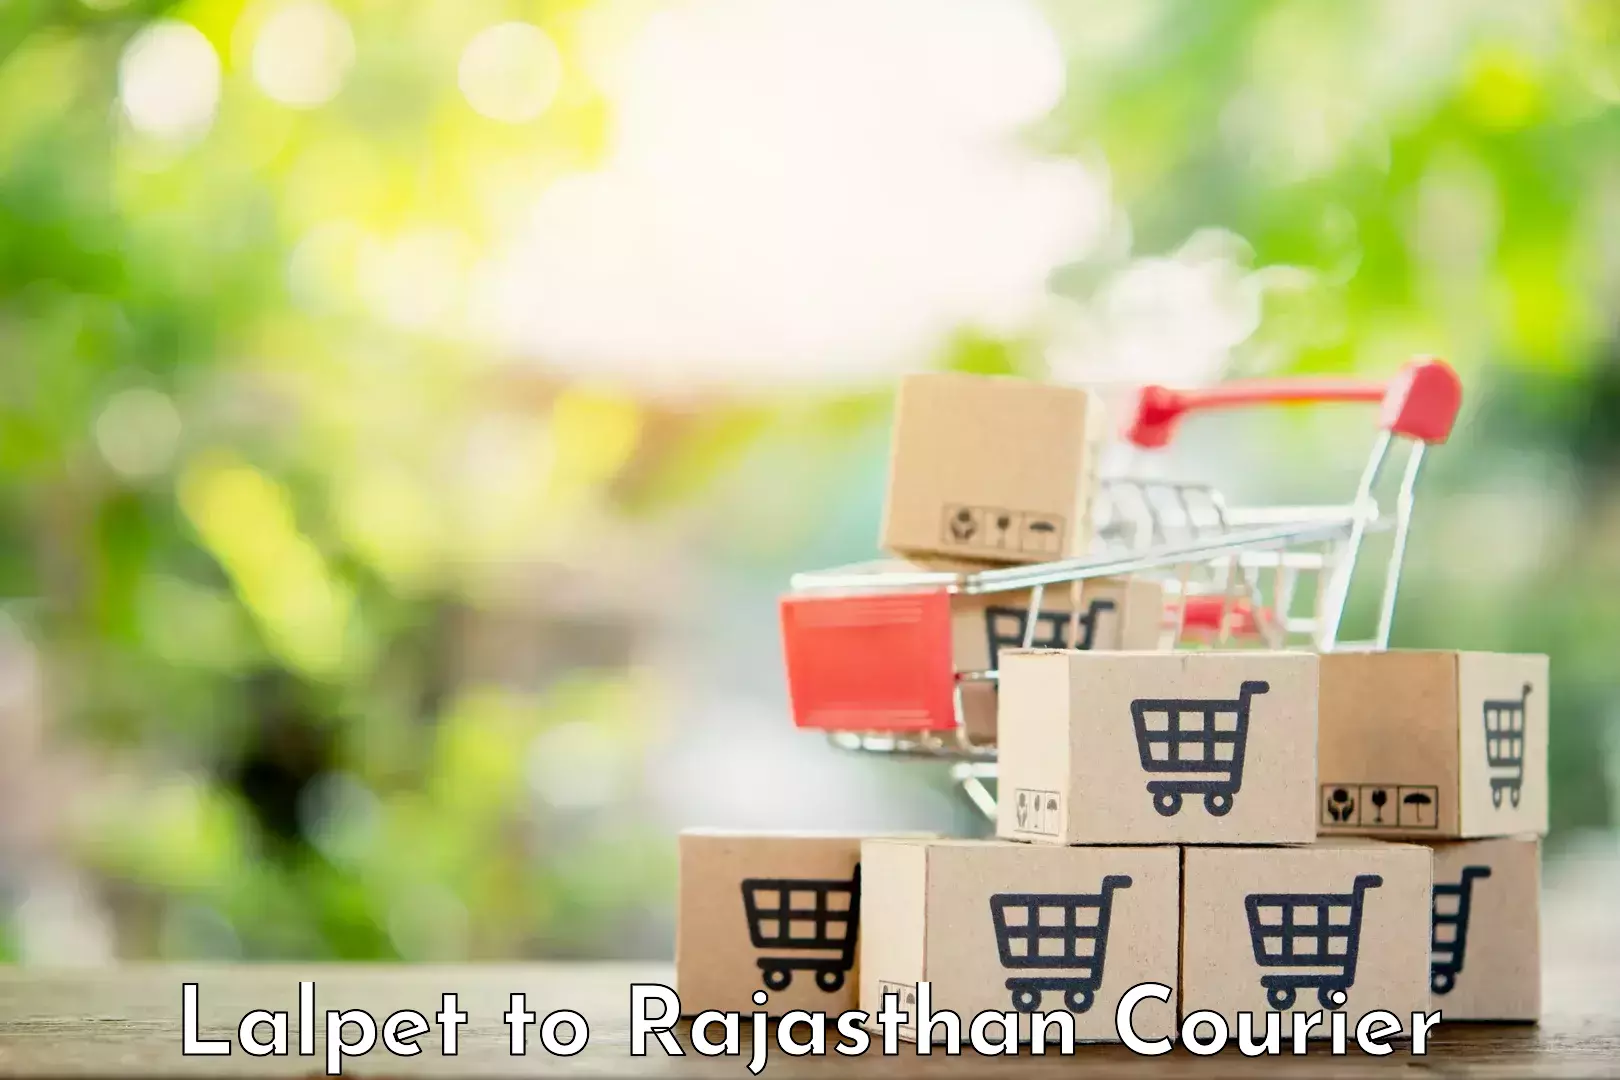 Efficient order fulfillment Lalpet to Rajasthan